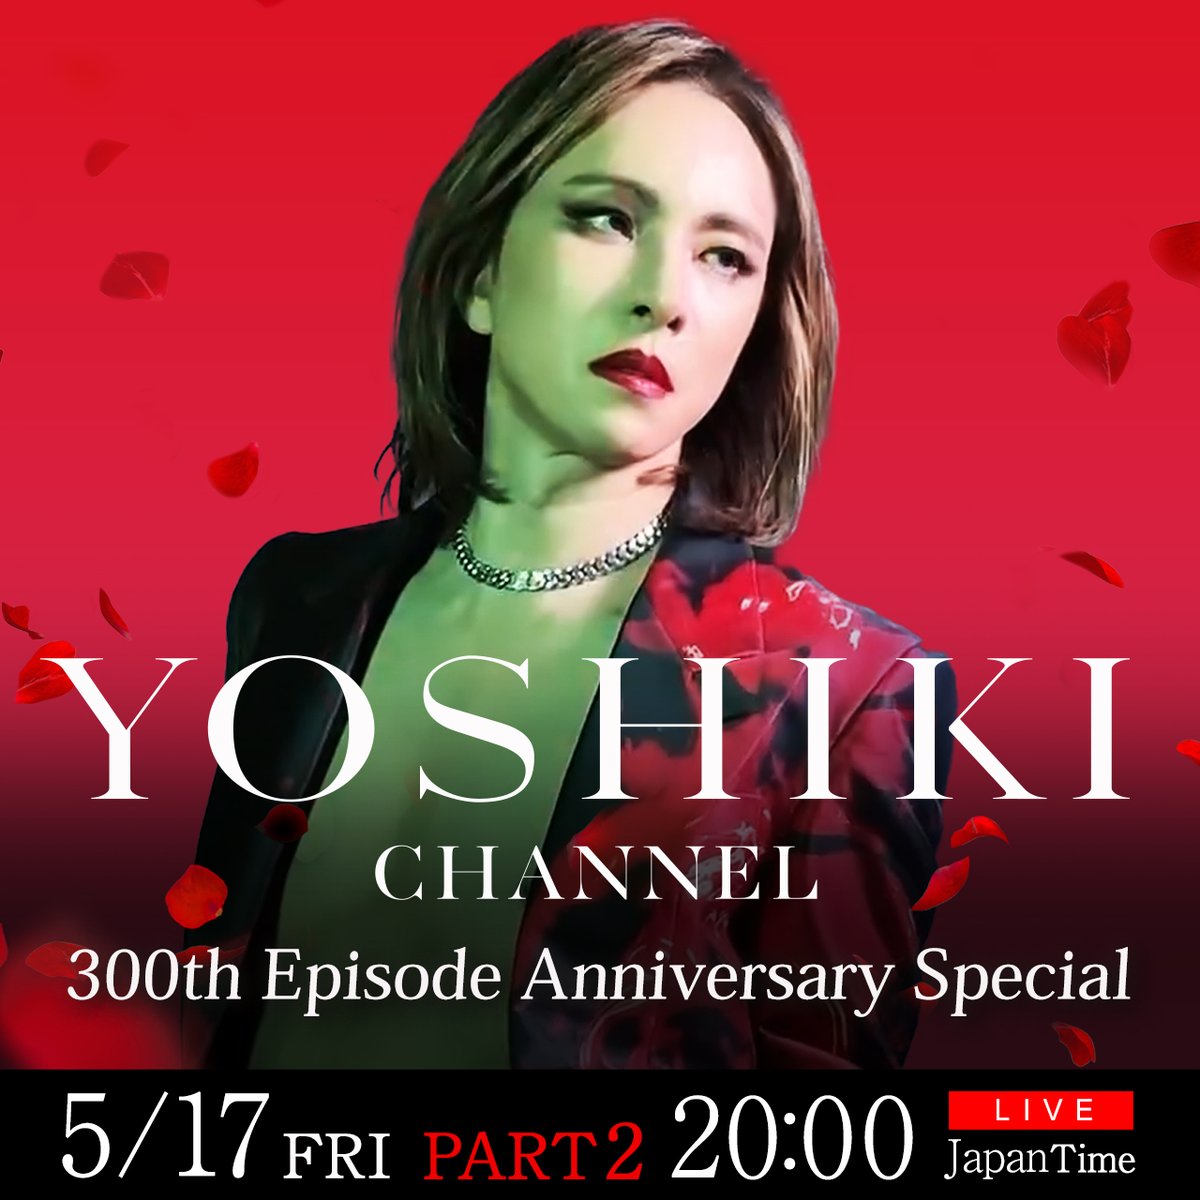 #YOSHIKICHANNEL Special Live Broadcast on May 17th! #YOSHIKI will hold a press conference in Tokyo! And YOSHIKI CHANNEL is celebrating its 300th episode! Don't miss it! YouTube (Japanese or Bilingual): May 17th, 8:00 PM (Japan Time) PART 2 – YOSHIKI CHANNEL 300th Episode